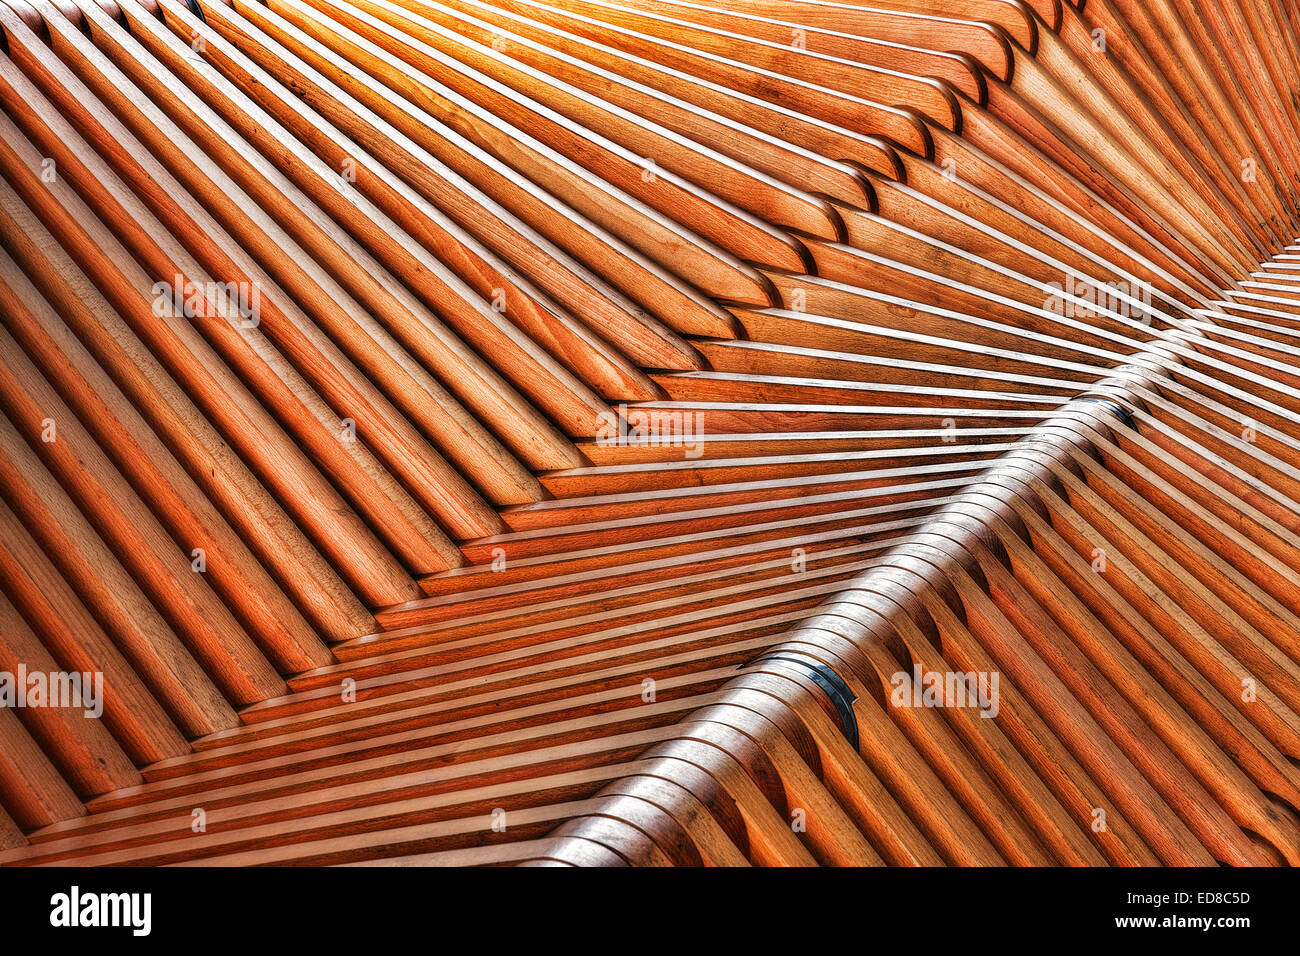 Abstract wooden construction Stock Photo